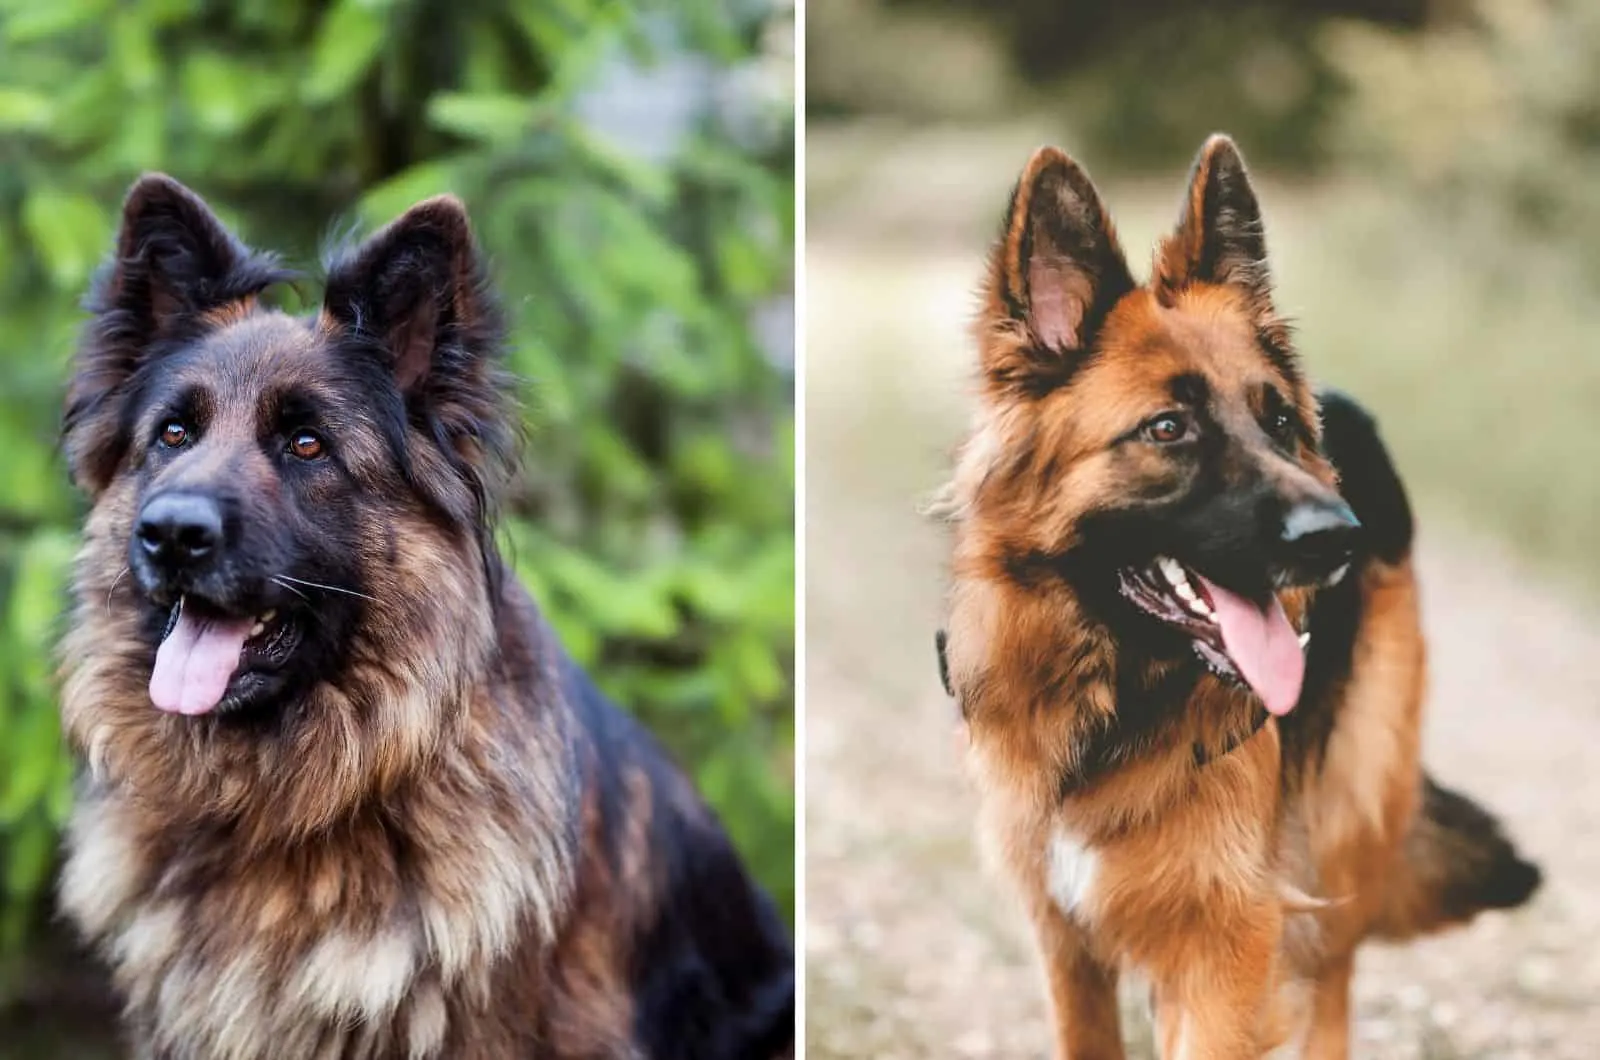 Long Haired German Shepherd and Short Haired side by side